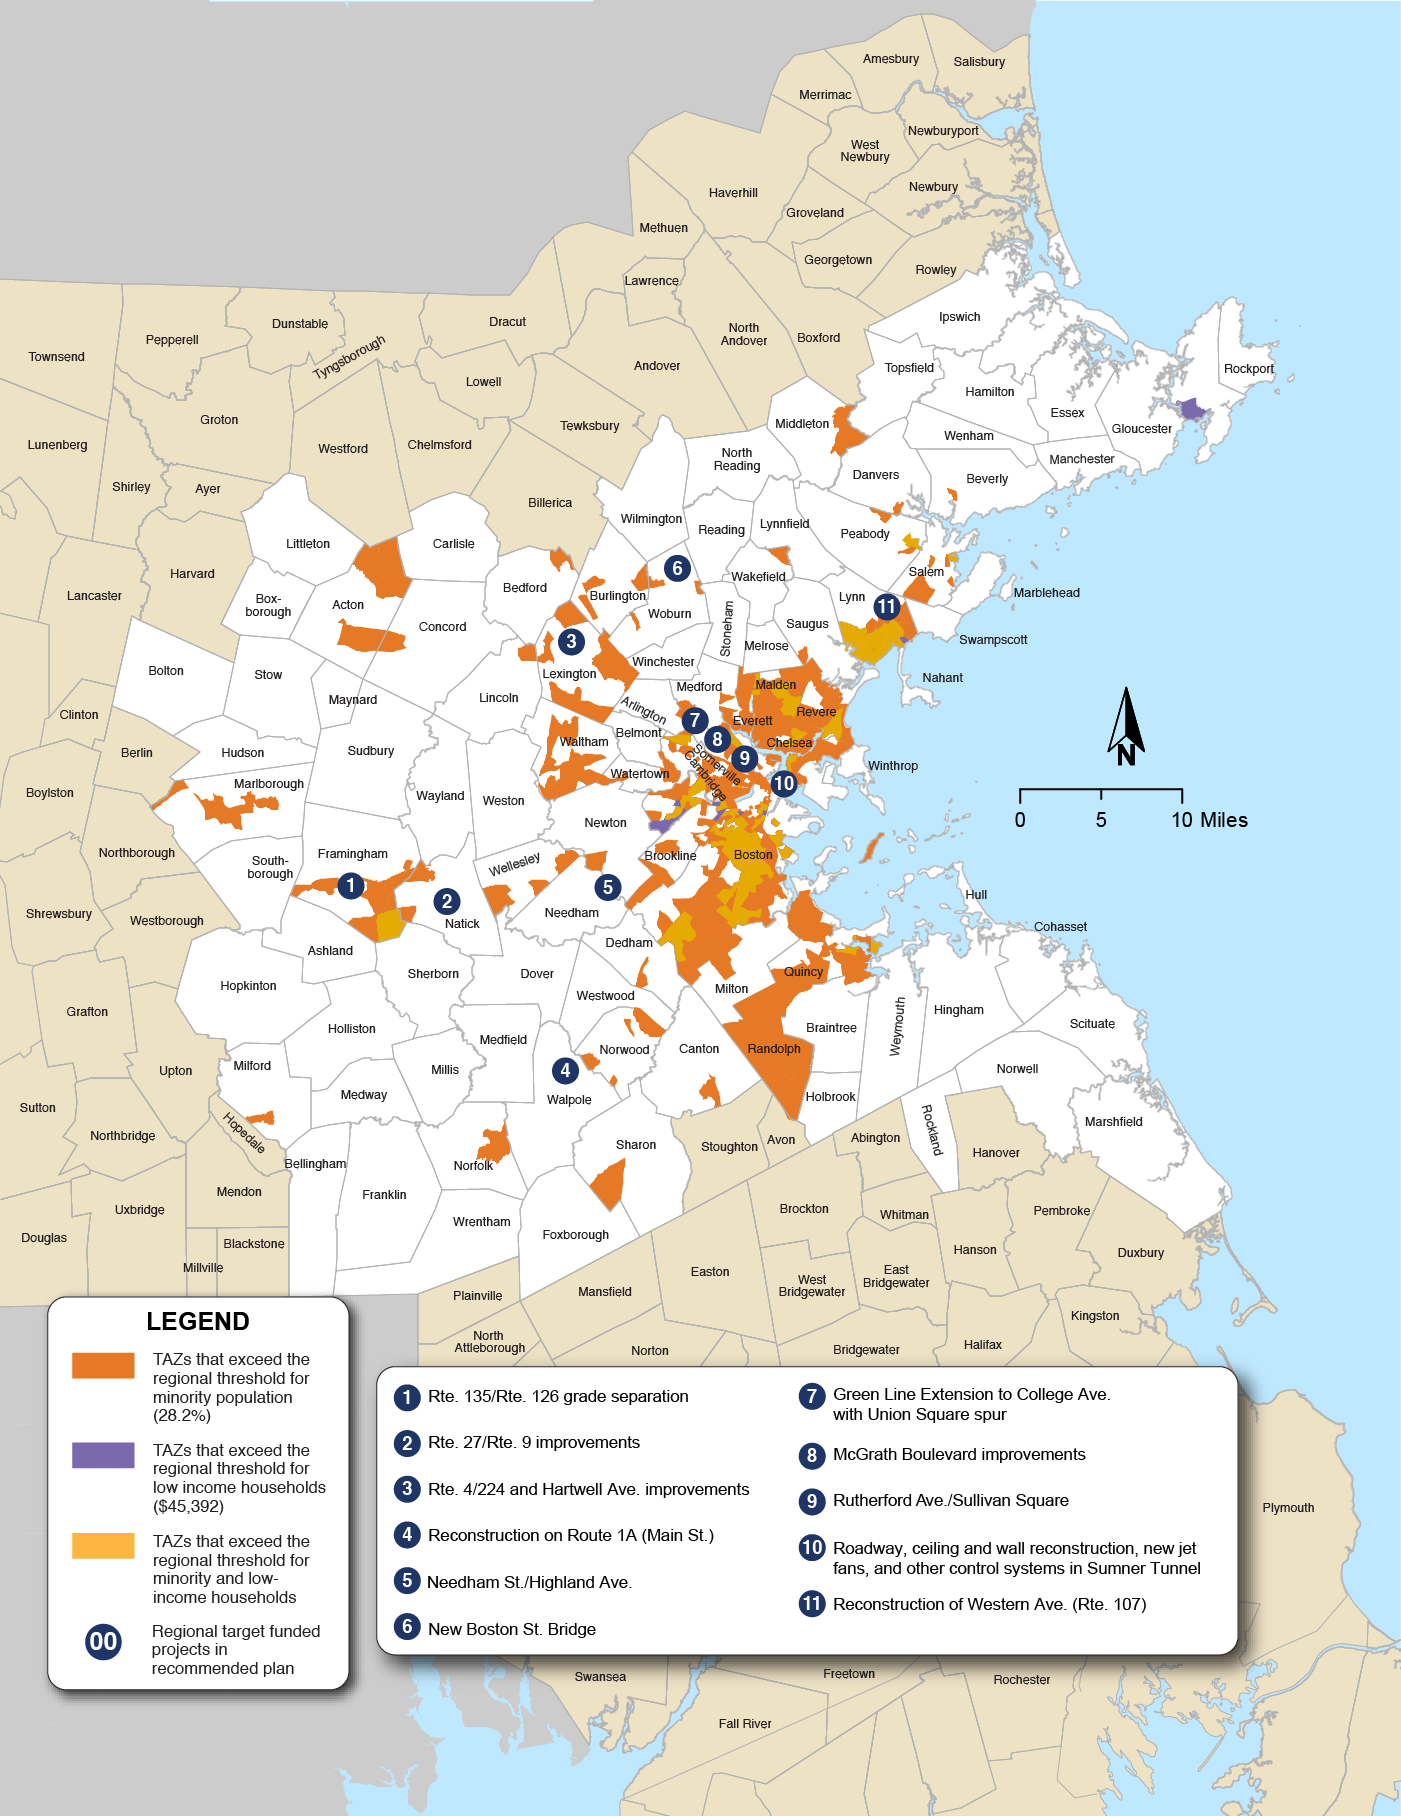 Figure 6-1. Recommended Plan Projects in Minority and Low-Income Transportation Equity Zones
Figure 6-1 is a map of the Boston region highlighting the transportation analysis zones (TAZs) that exceed the regional threshold for minority population, exceed the regional threshold for low-income households, and exceed the regional threshold for minority and low-income households. Figure 6-1 also shows the ten Long-Range Transportation Plan projects in these locations. 
